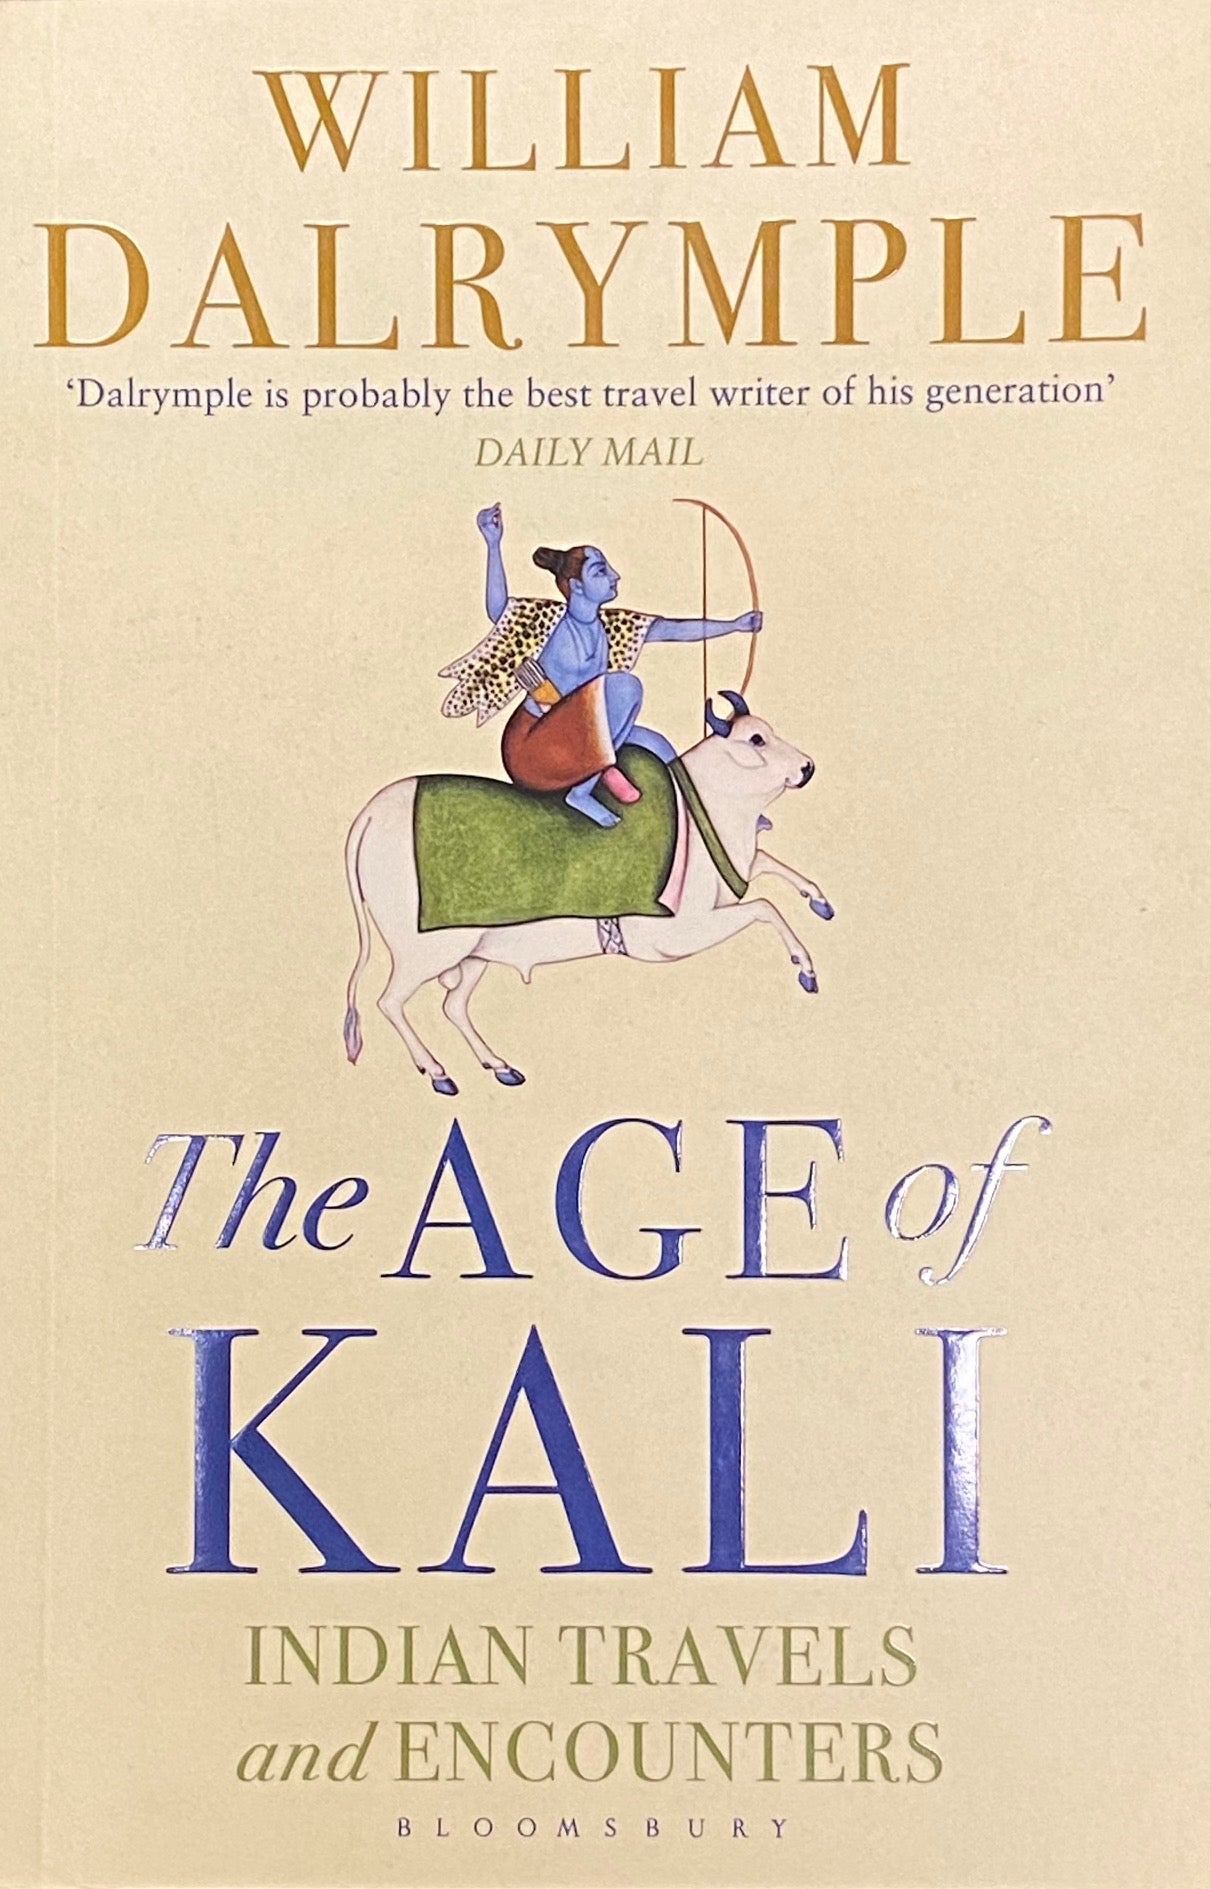 The Age of Kali: Indian travels and Encounters by William Dalrymple